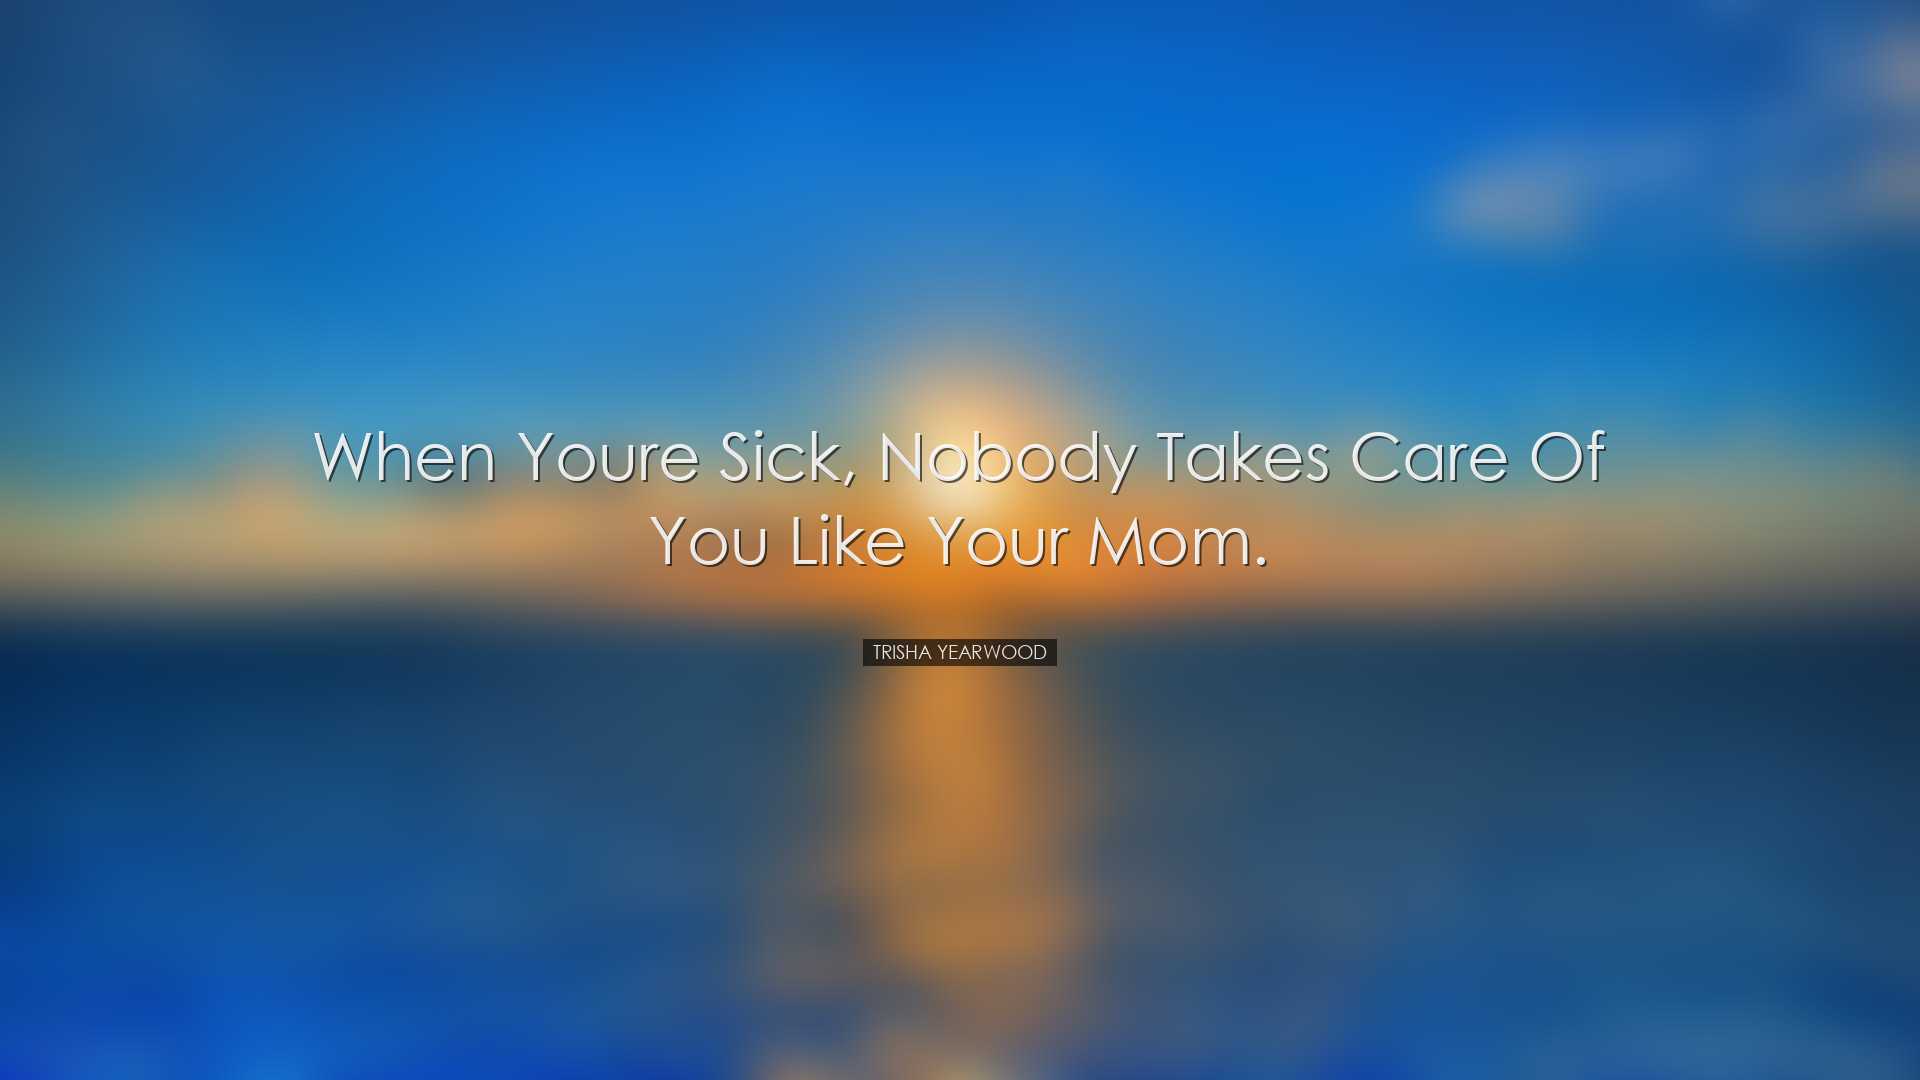 When youre sick, nobody takes care of you like your mom. - Trisha